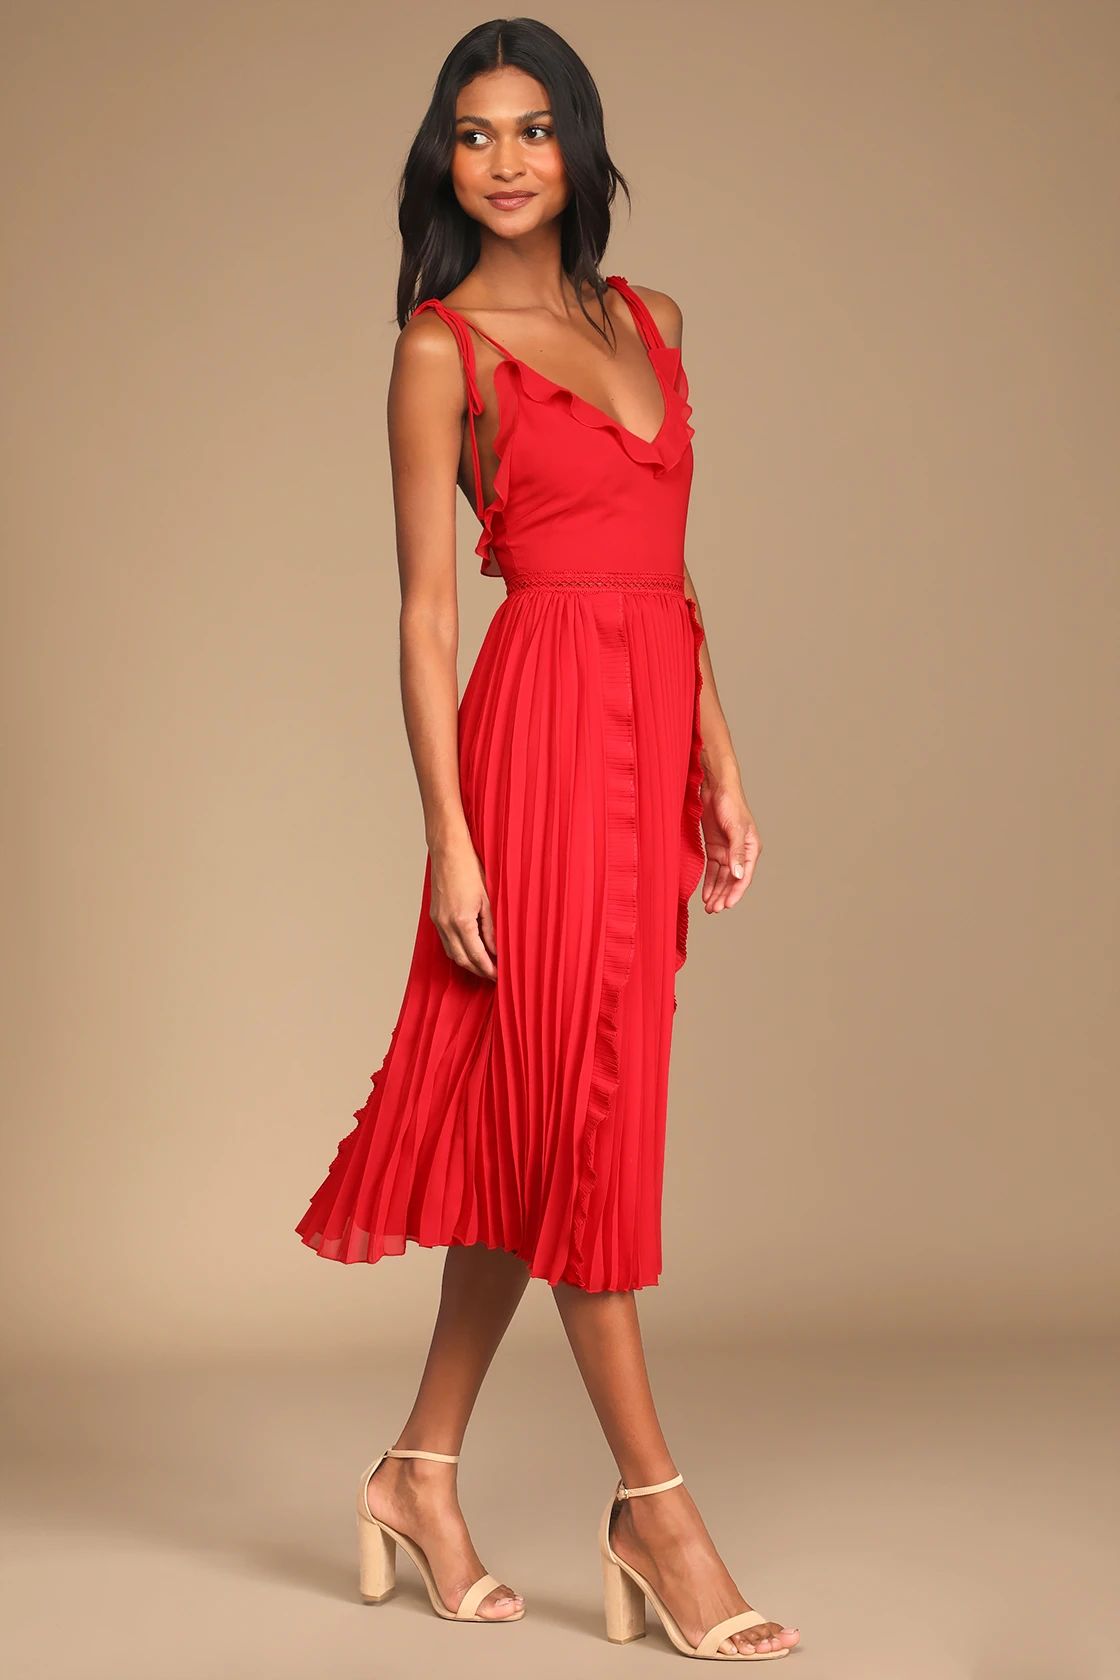 Never a Dull Moment Bright Red Tie-Strap Pleated Midi Dress | Lulus